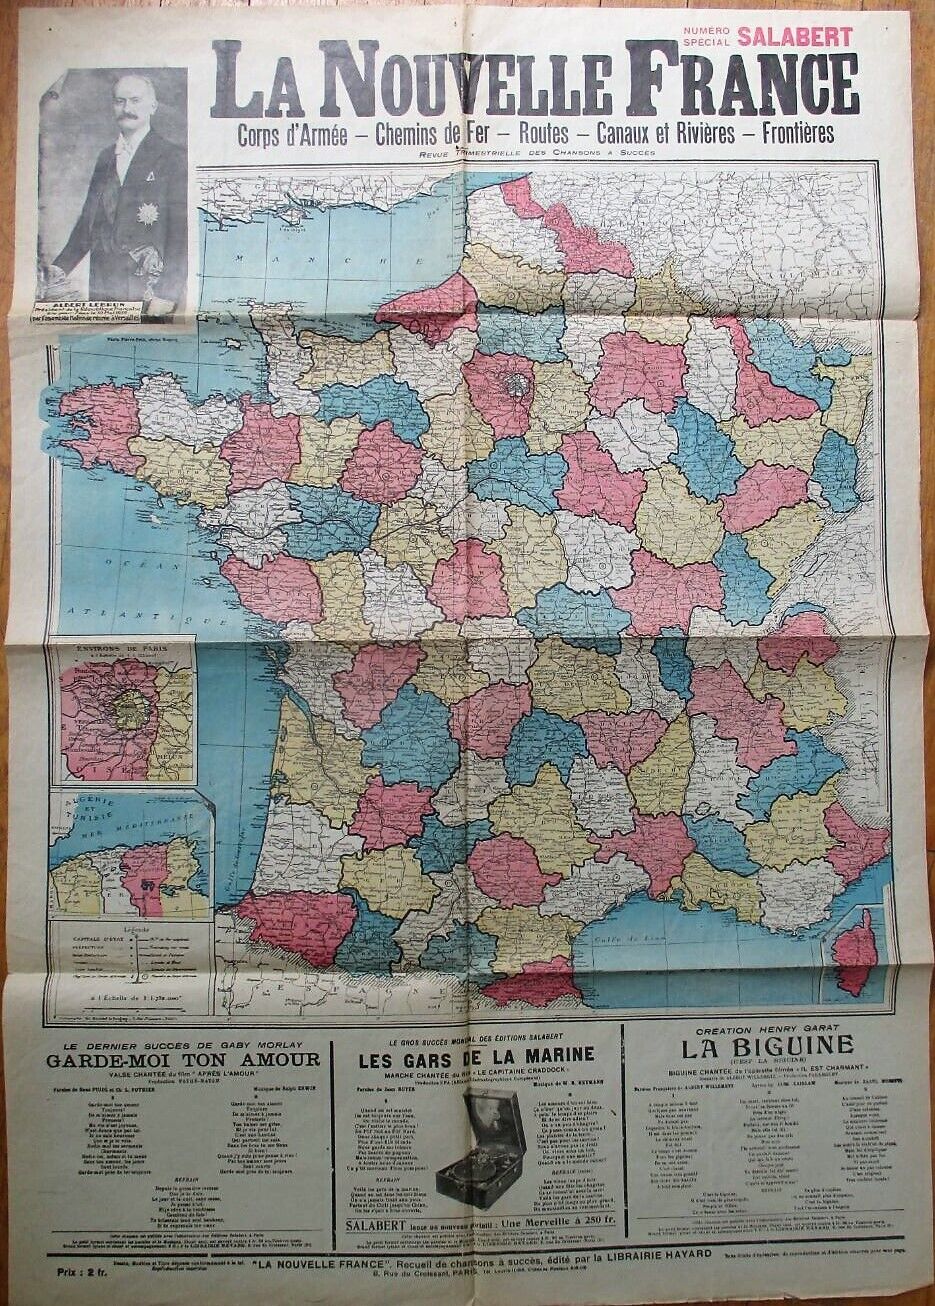 Railroad & Street Map 1930 Large French Advertising Poster-Phonograph, Ads, Etc.